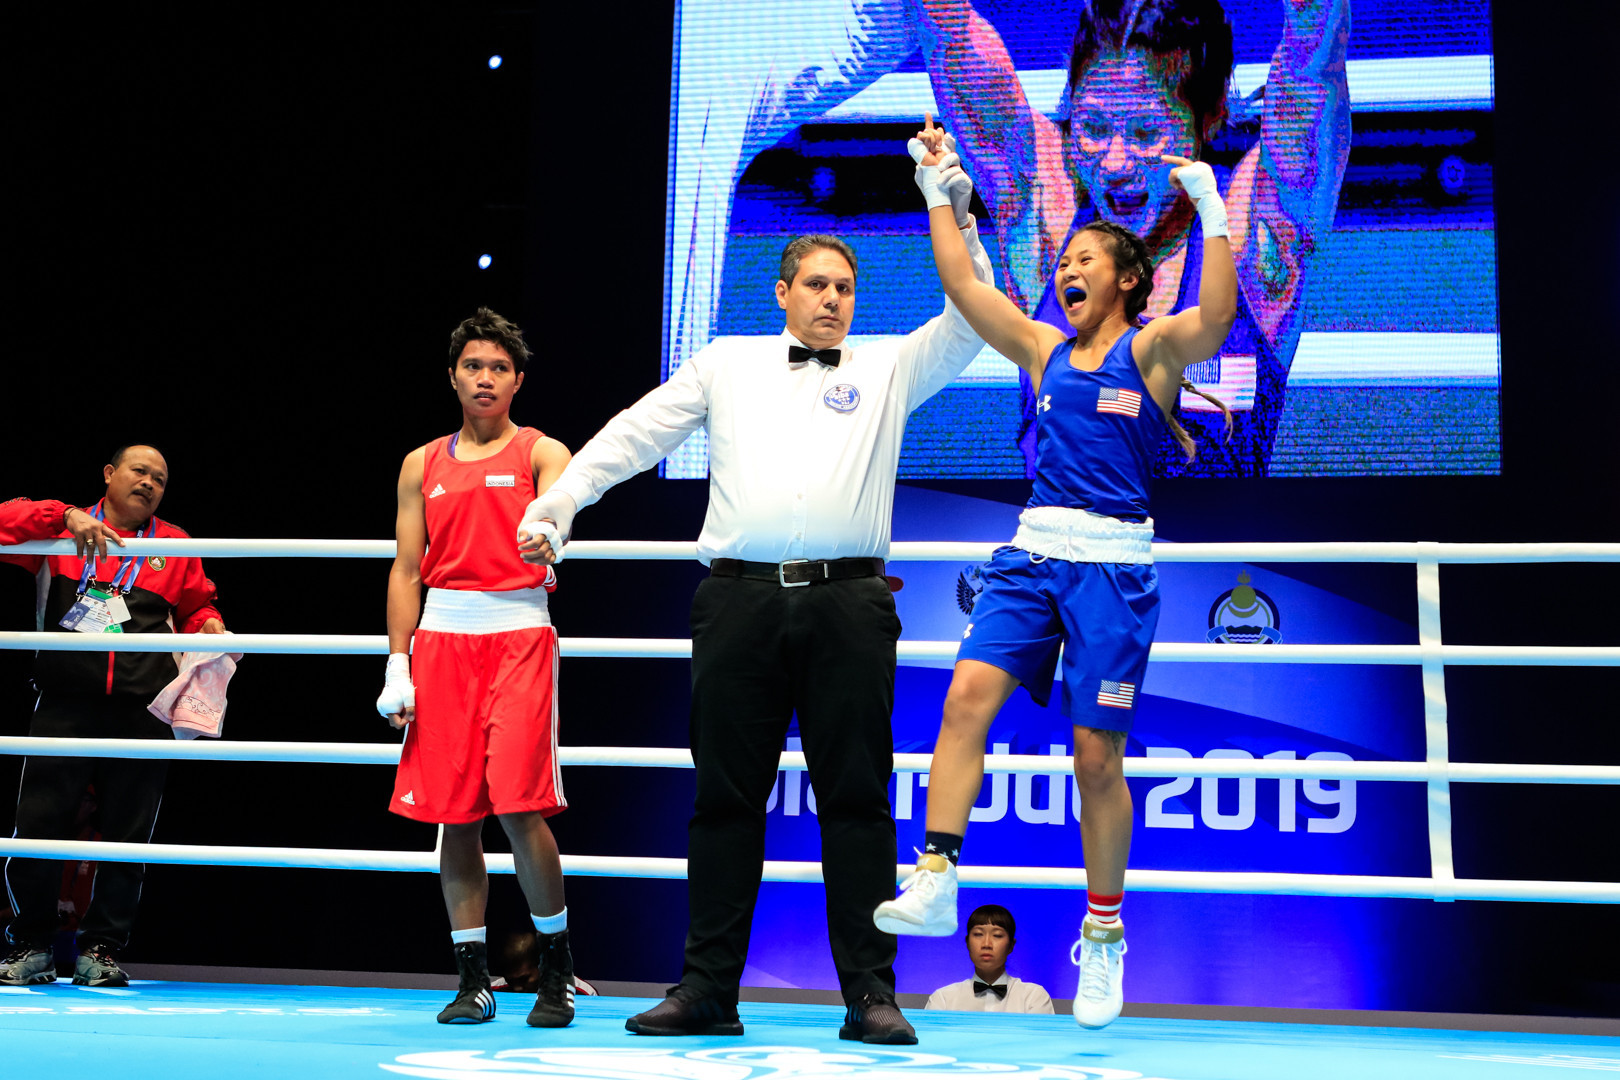 Breeanna Locquiao narrowly defeated Indonesia's Endang Endang in the light flyweight division ©Russian Boxing Federation